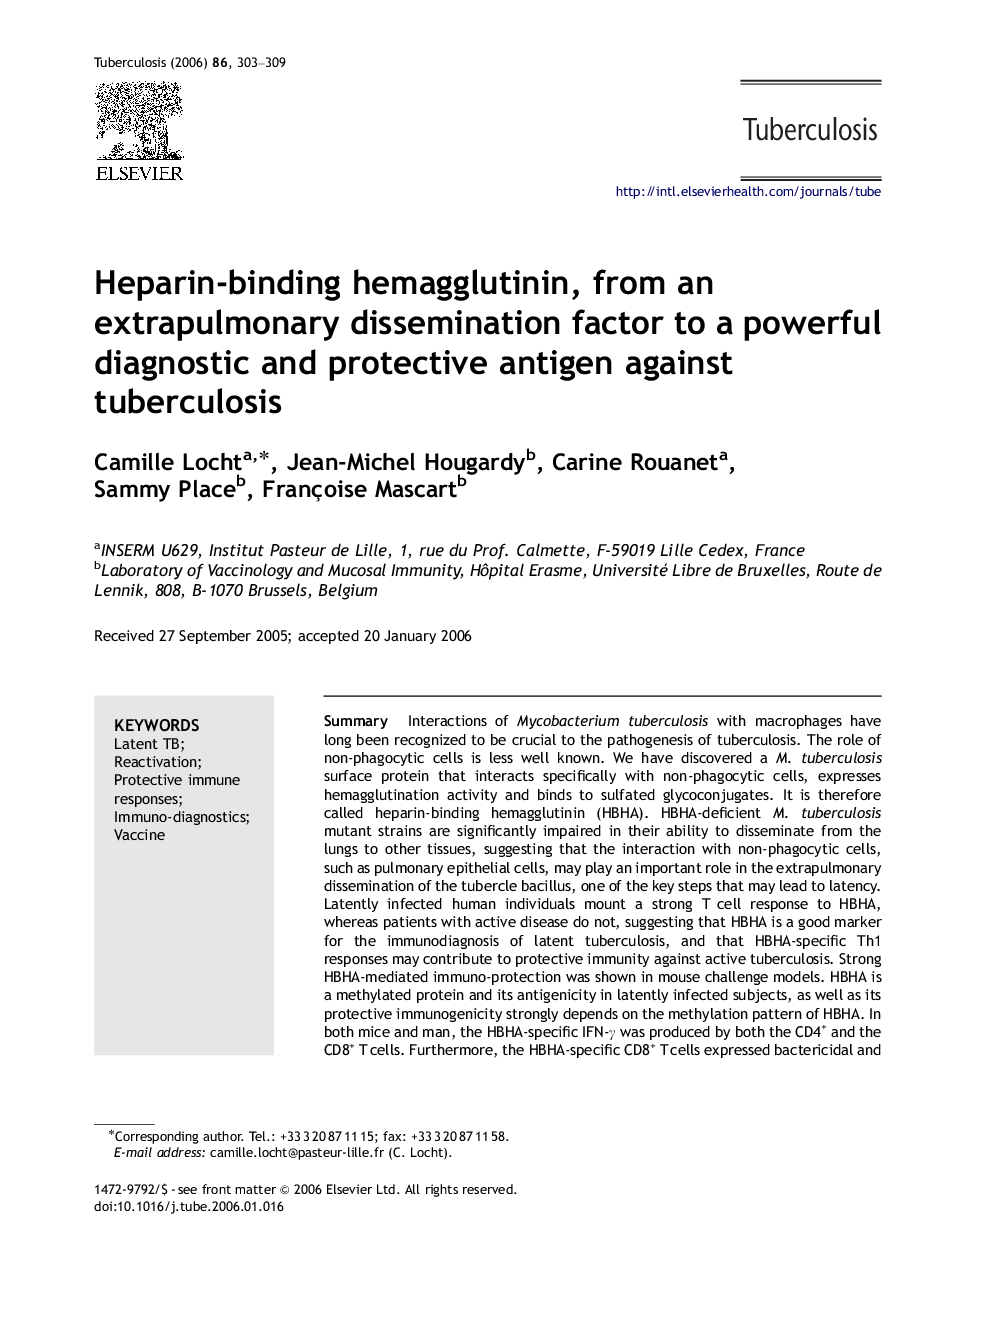 Heparin-binding hemagglutinin, from an extrapulmonary dissemination factor to a powerful diagnostic and protective antigen against tuberculosis